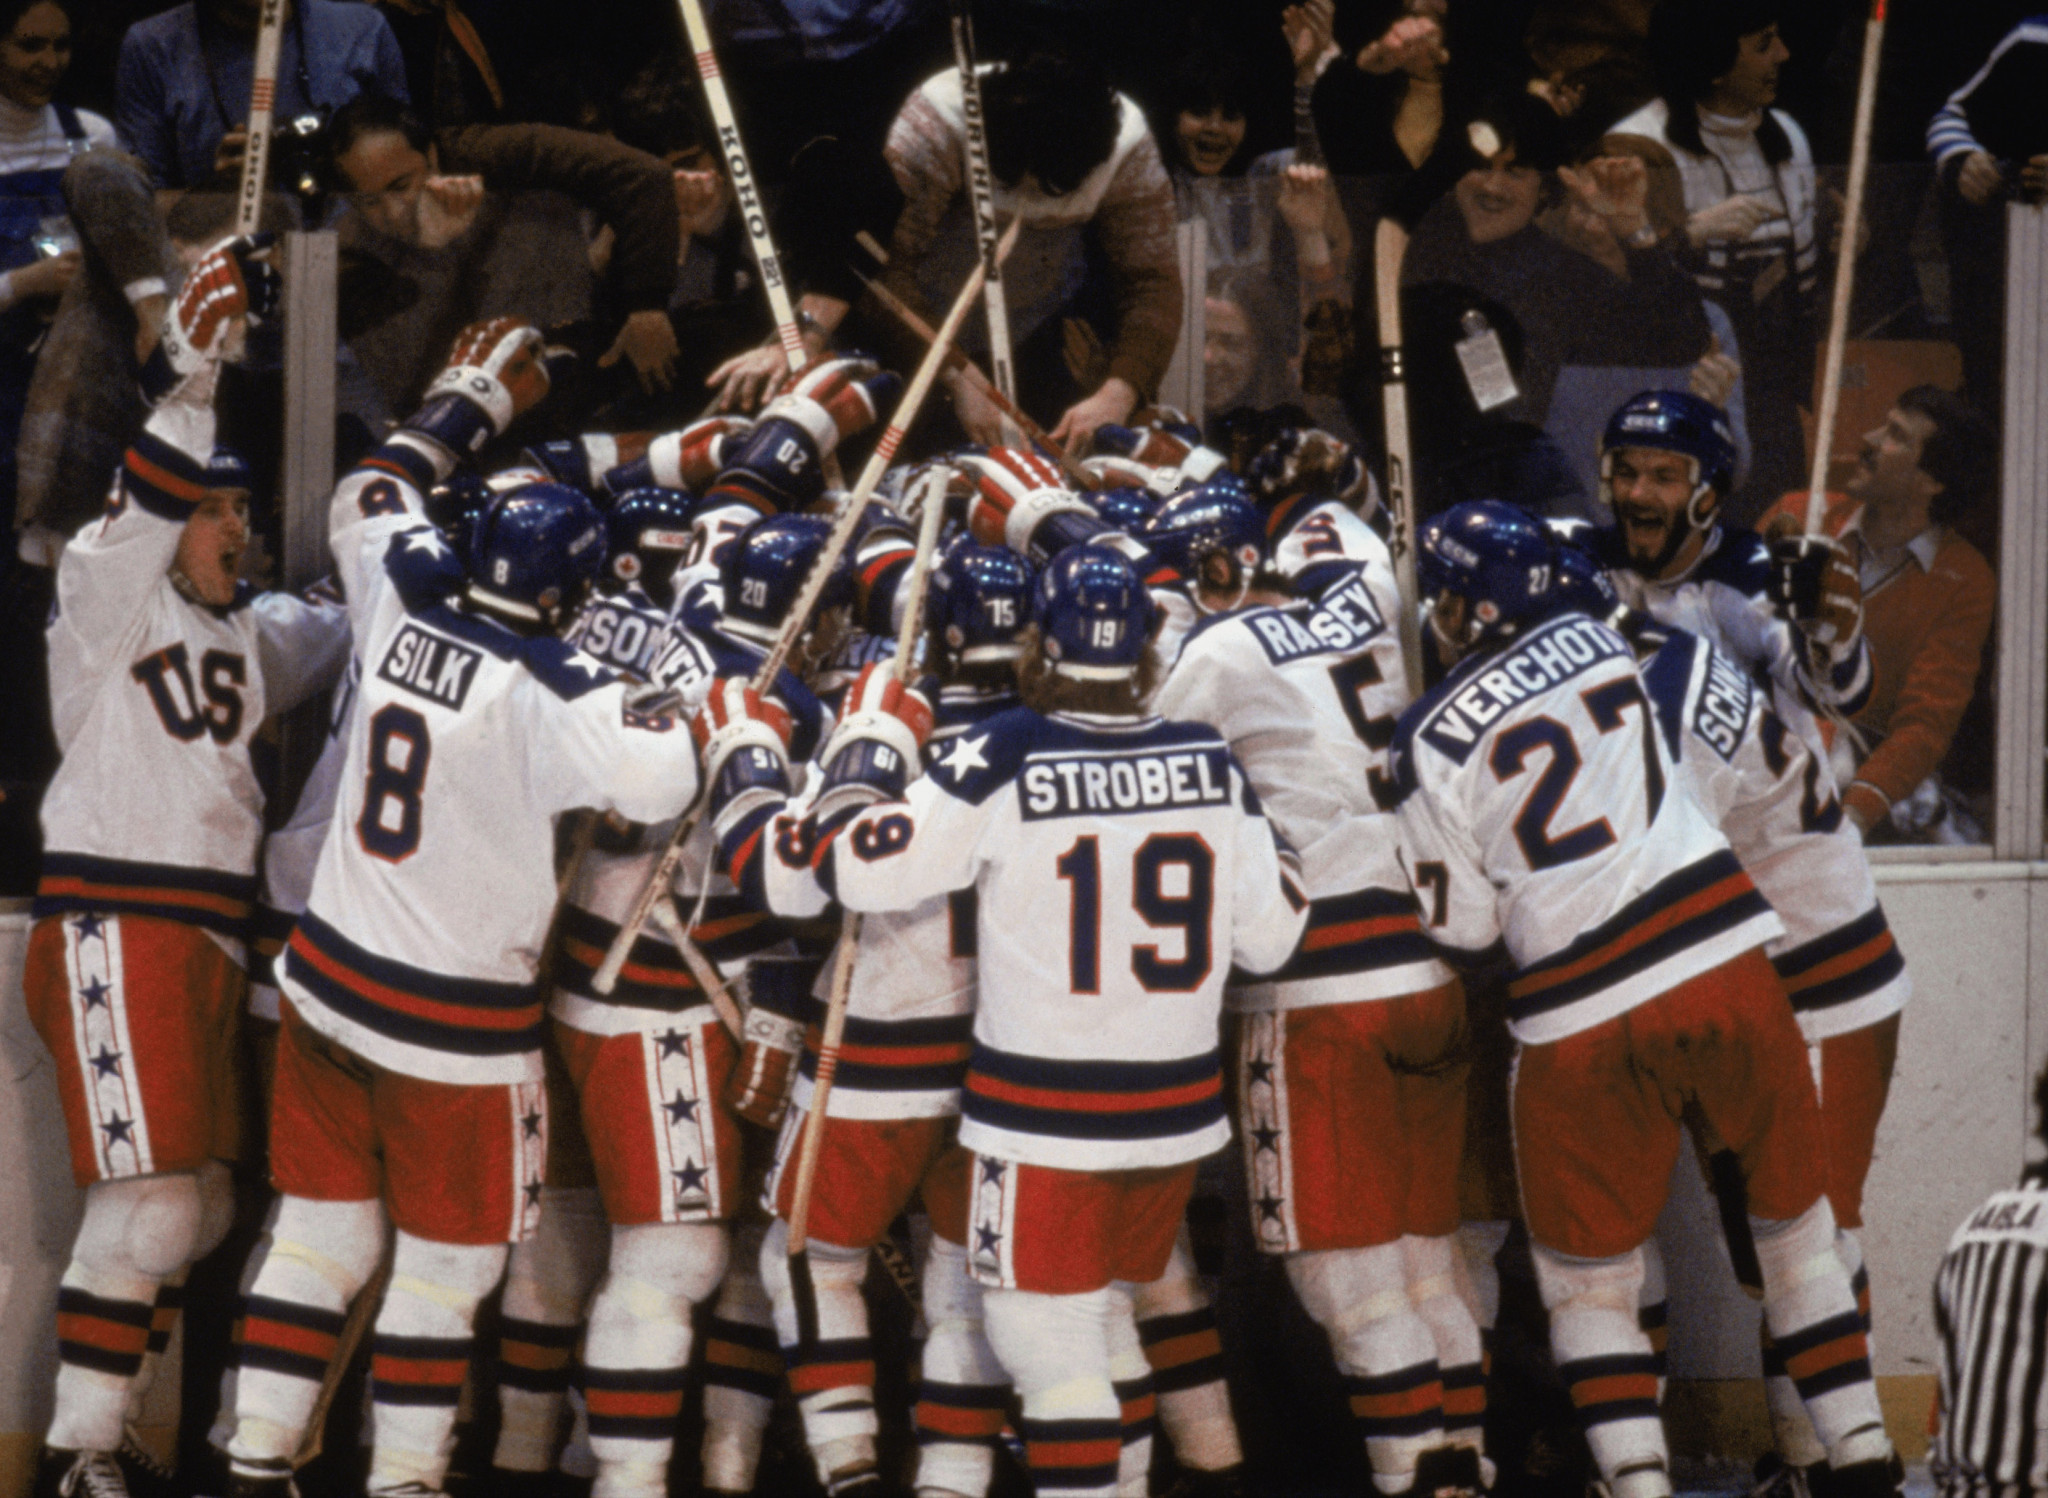 MIRACLE ON ICE' AT 40: 'It was more than a hockey game' for